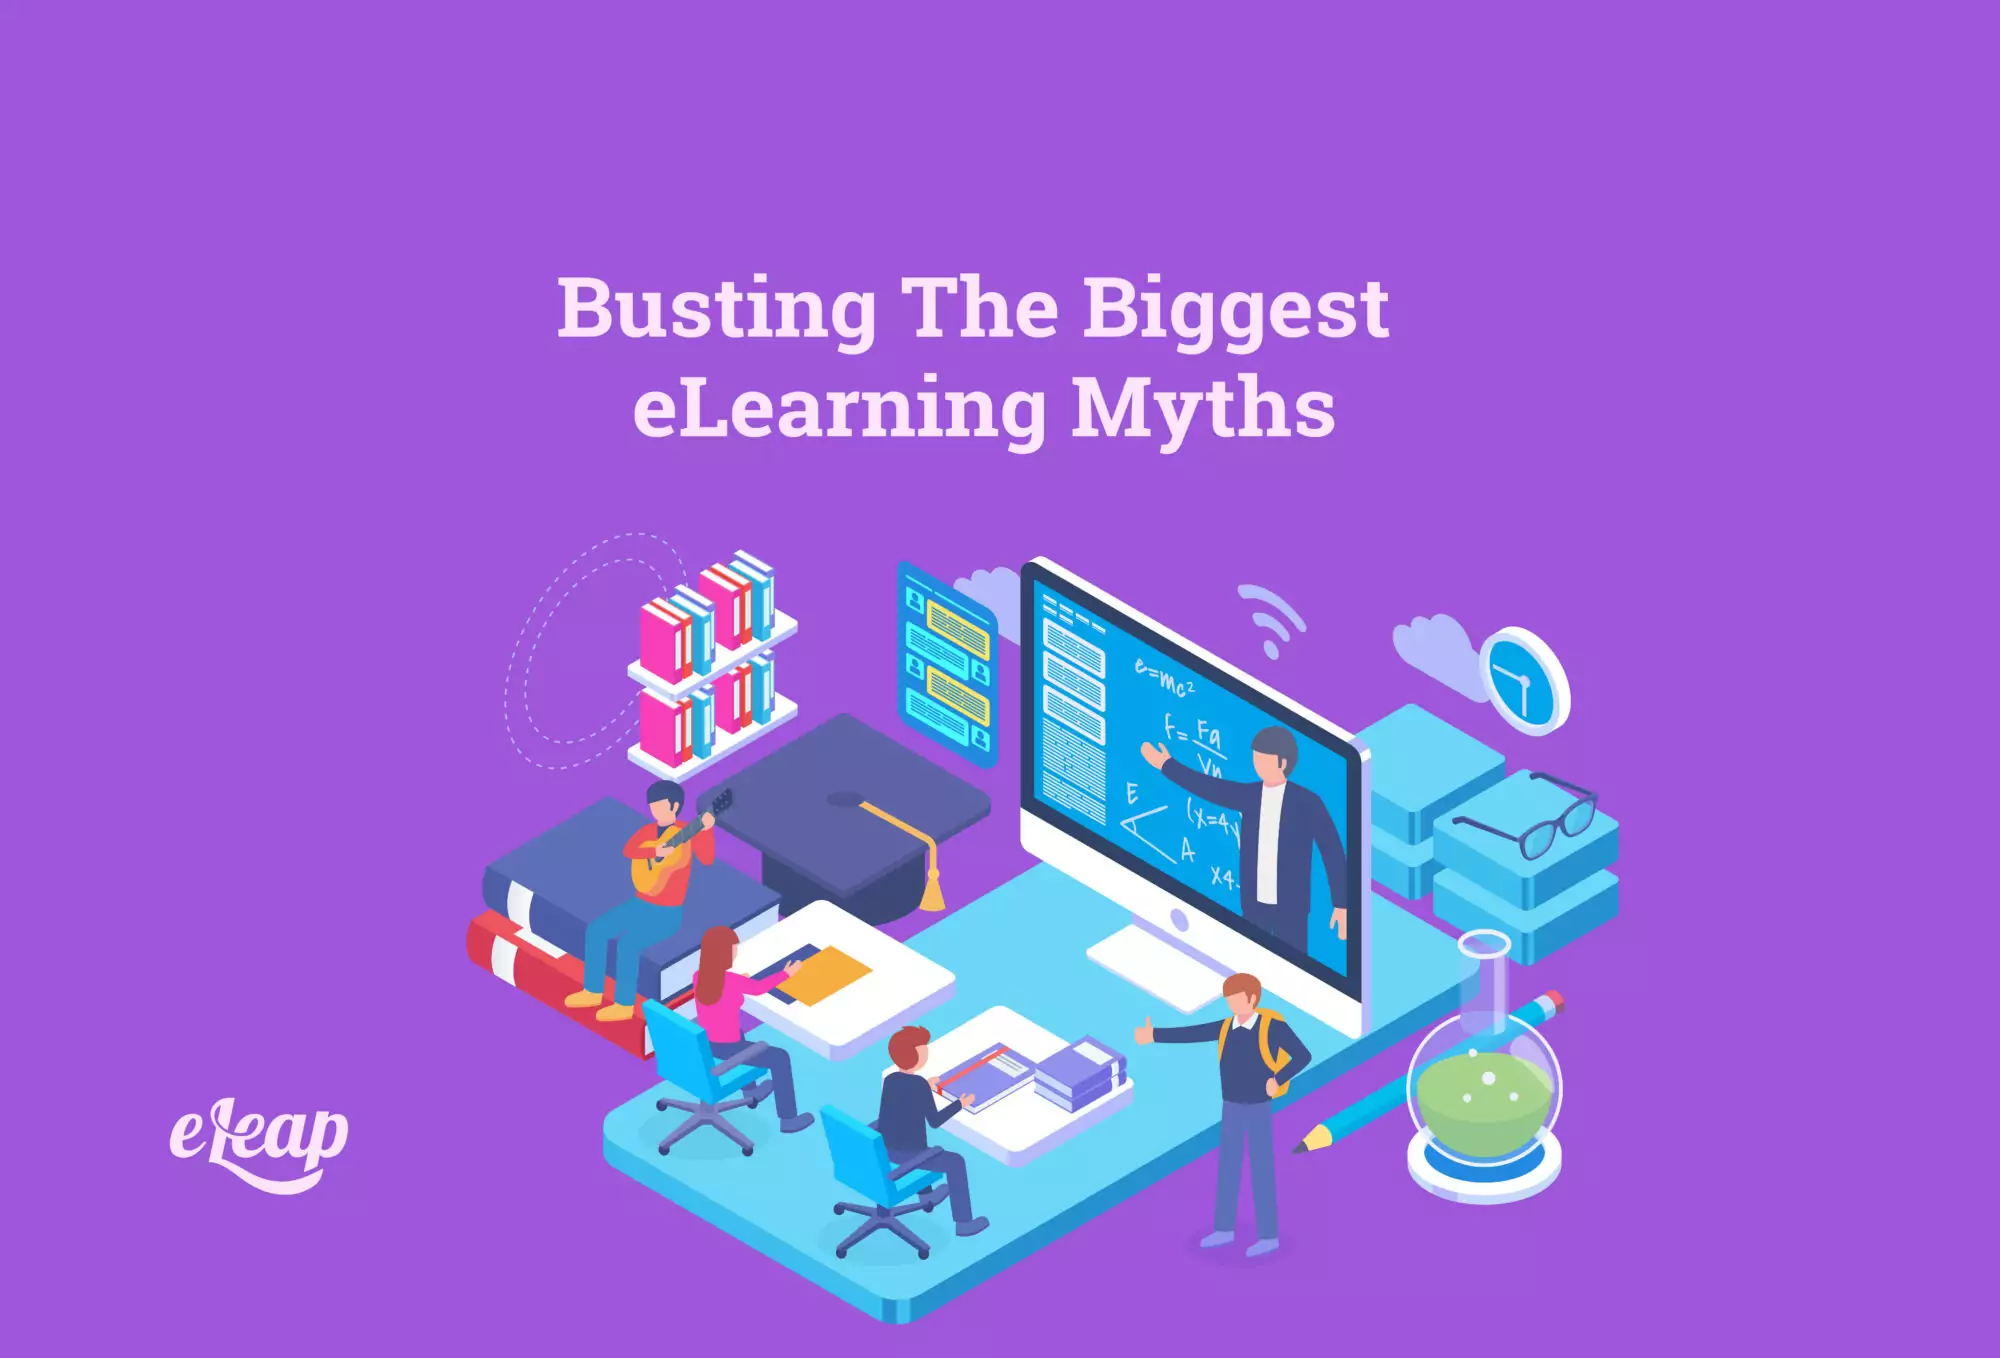 Busting The Biggest eLearning Myths